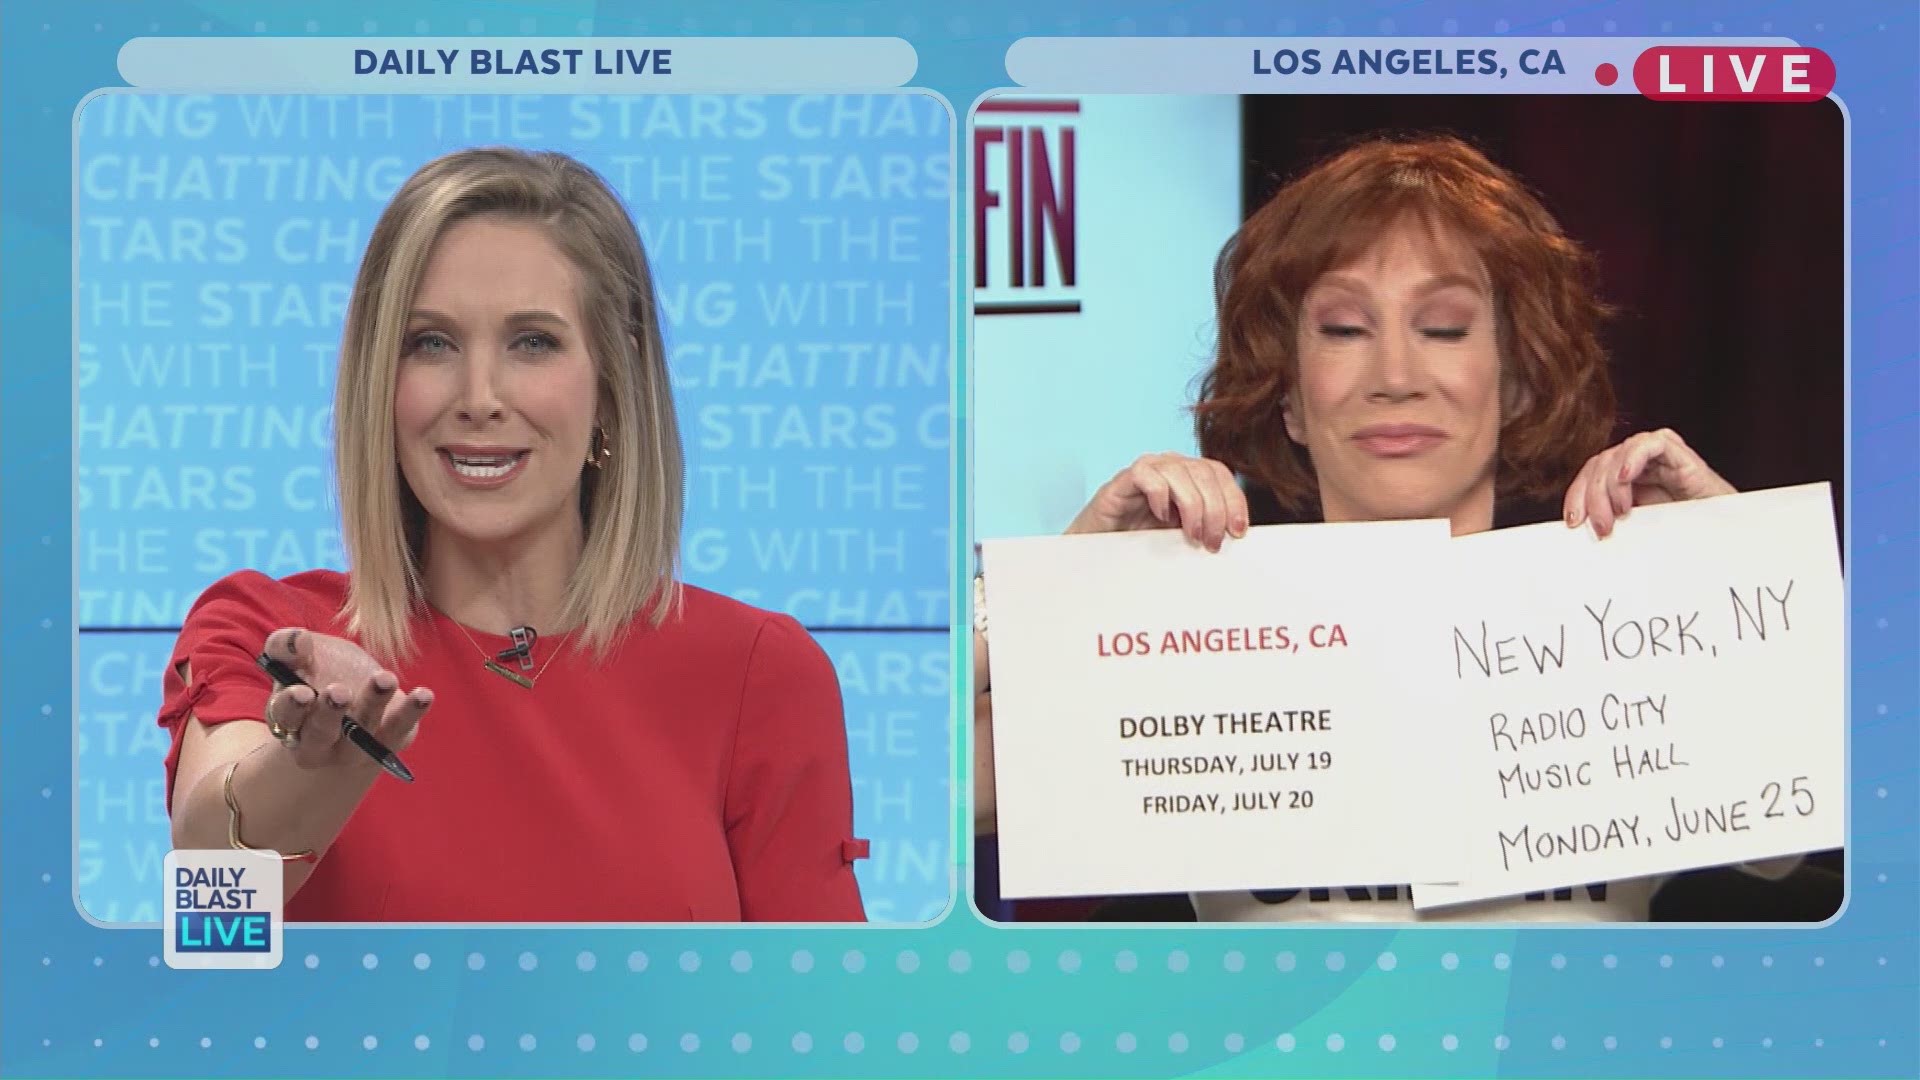 What has the infamous comedian been up to since facing off with the President? Daily Blast LIVE co-host Sam Schacher got an exclusive interview with Kathy Griffin and did not hold back on her controversy. From her former BFF Andy Cohen to her federal inve